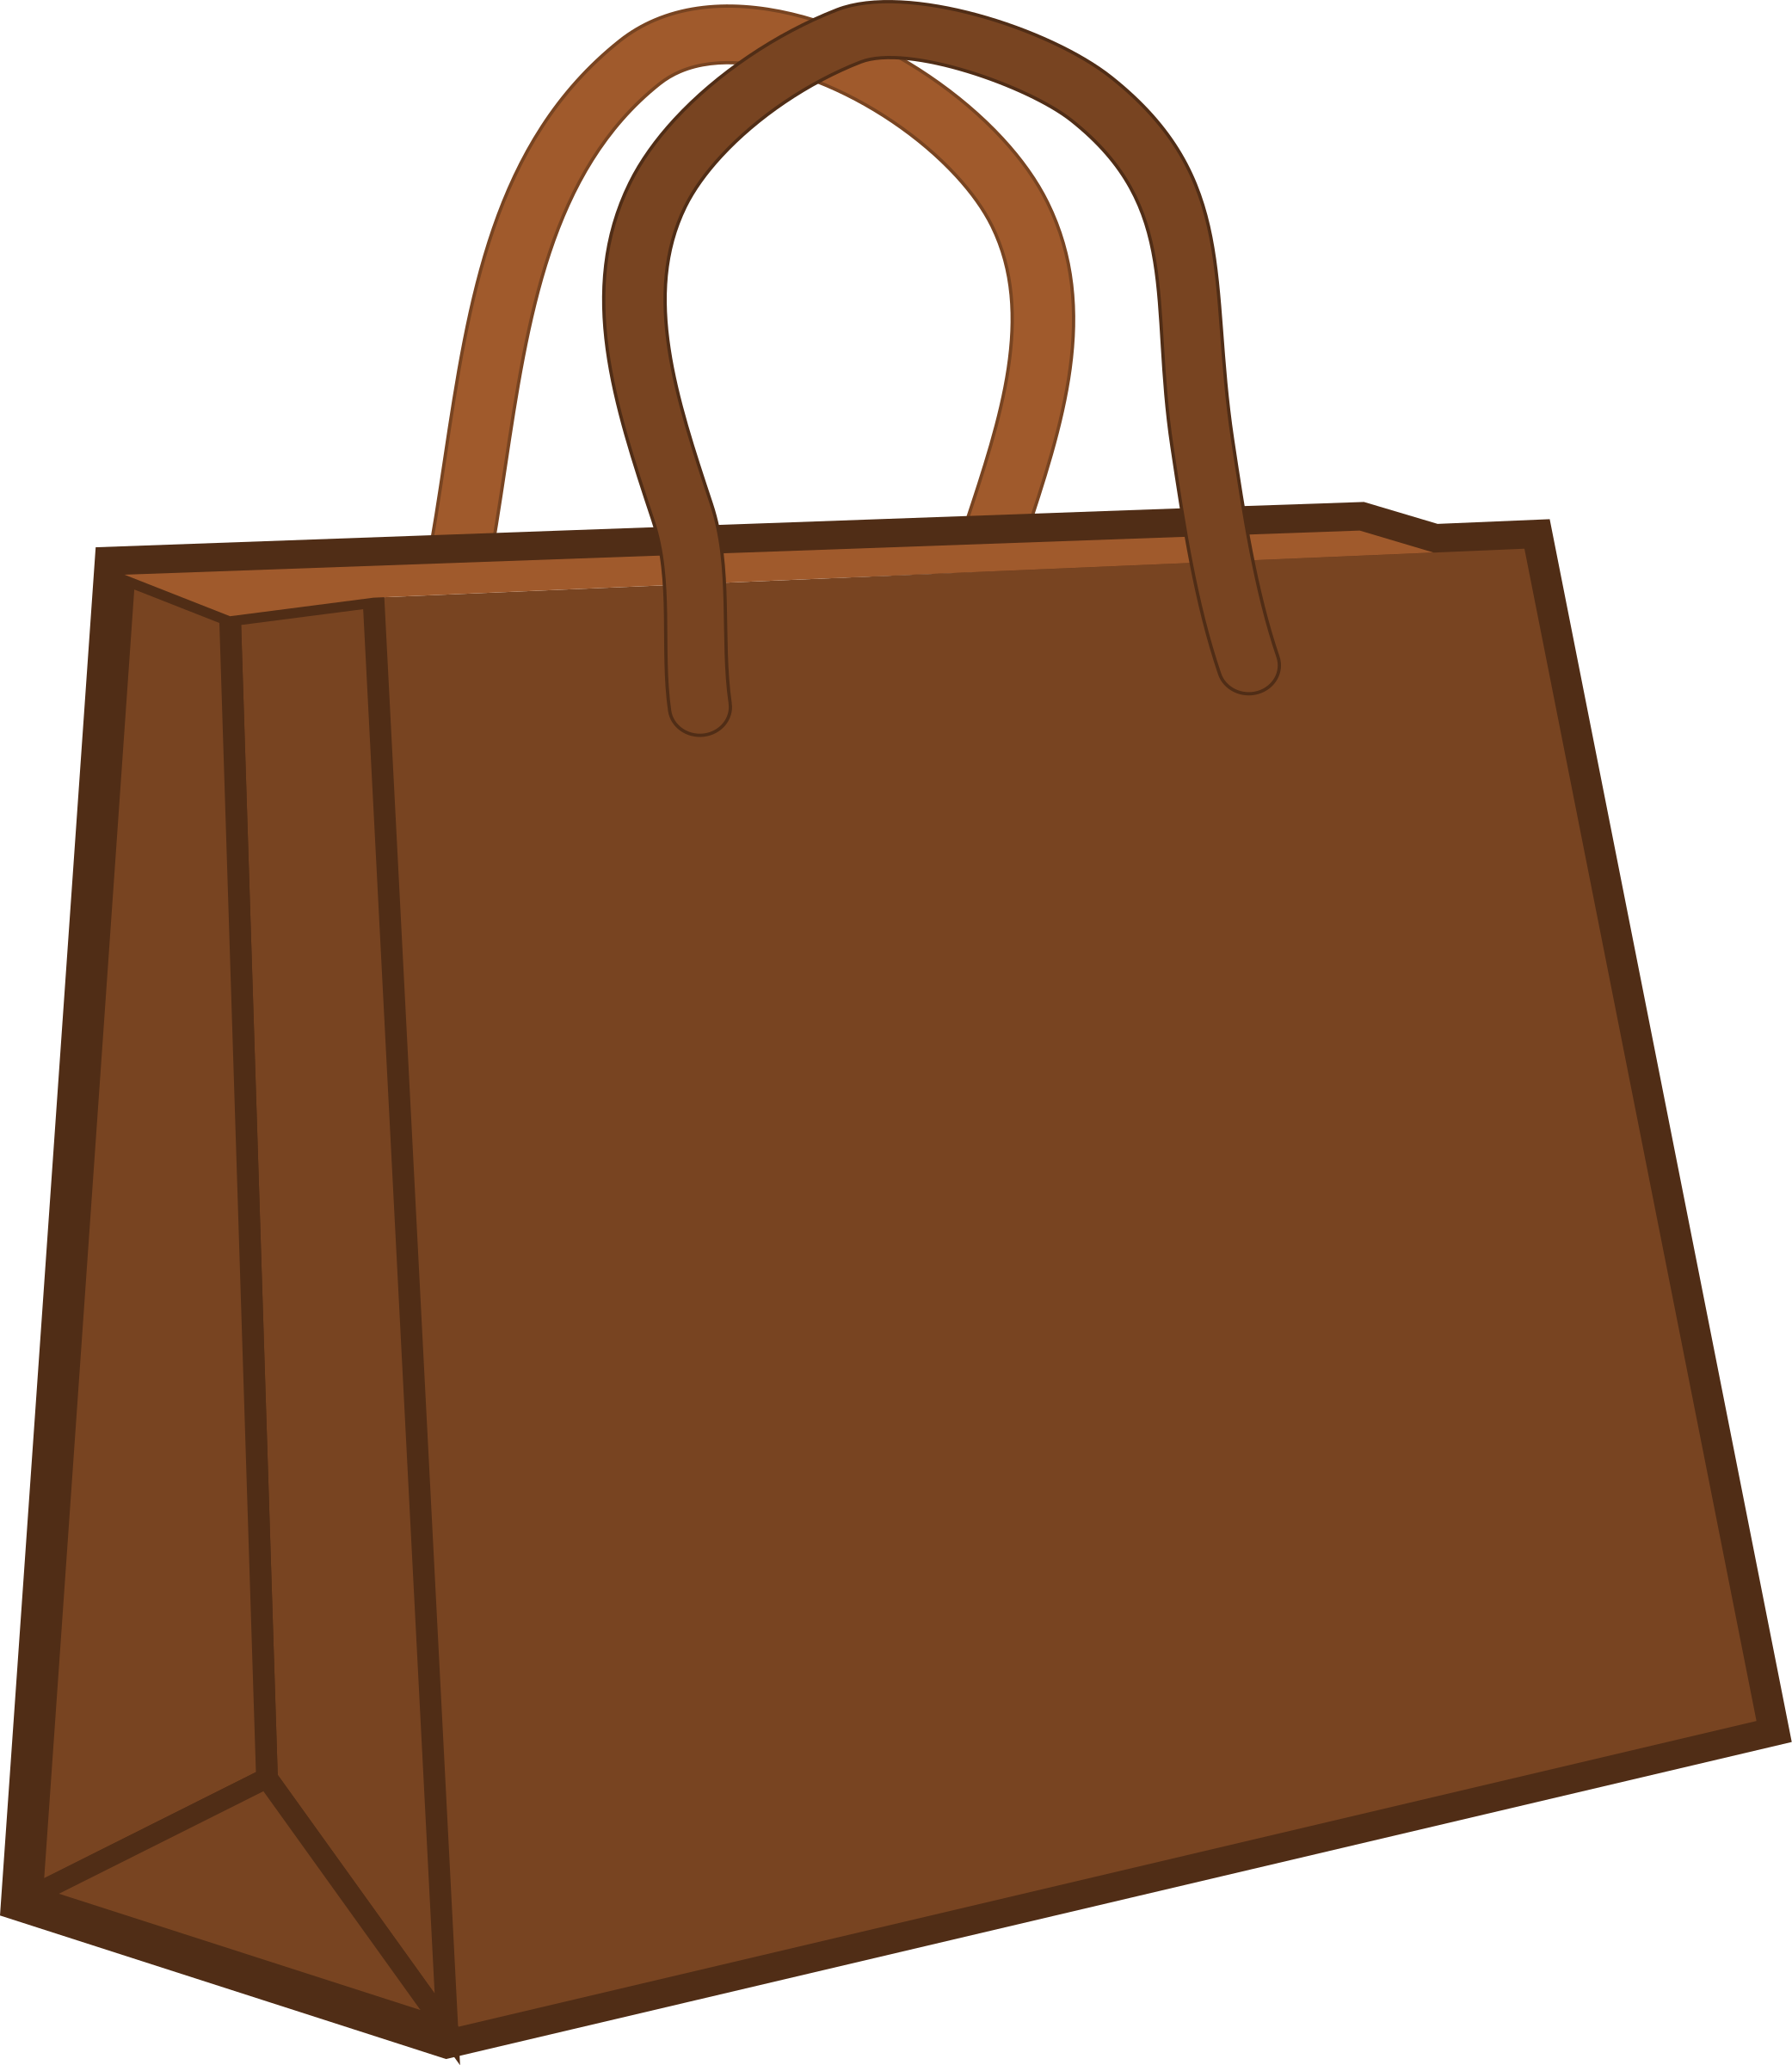 Paper Bag Cartoon Images ~ Download High Quality Lunch Clip Art Packed ...